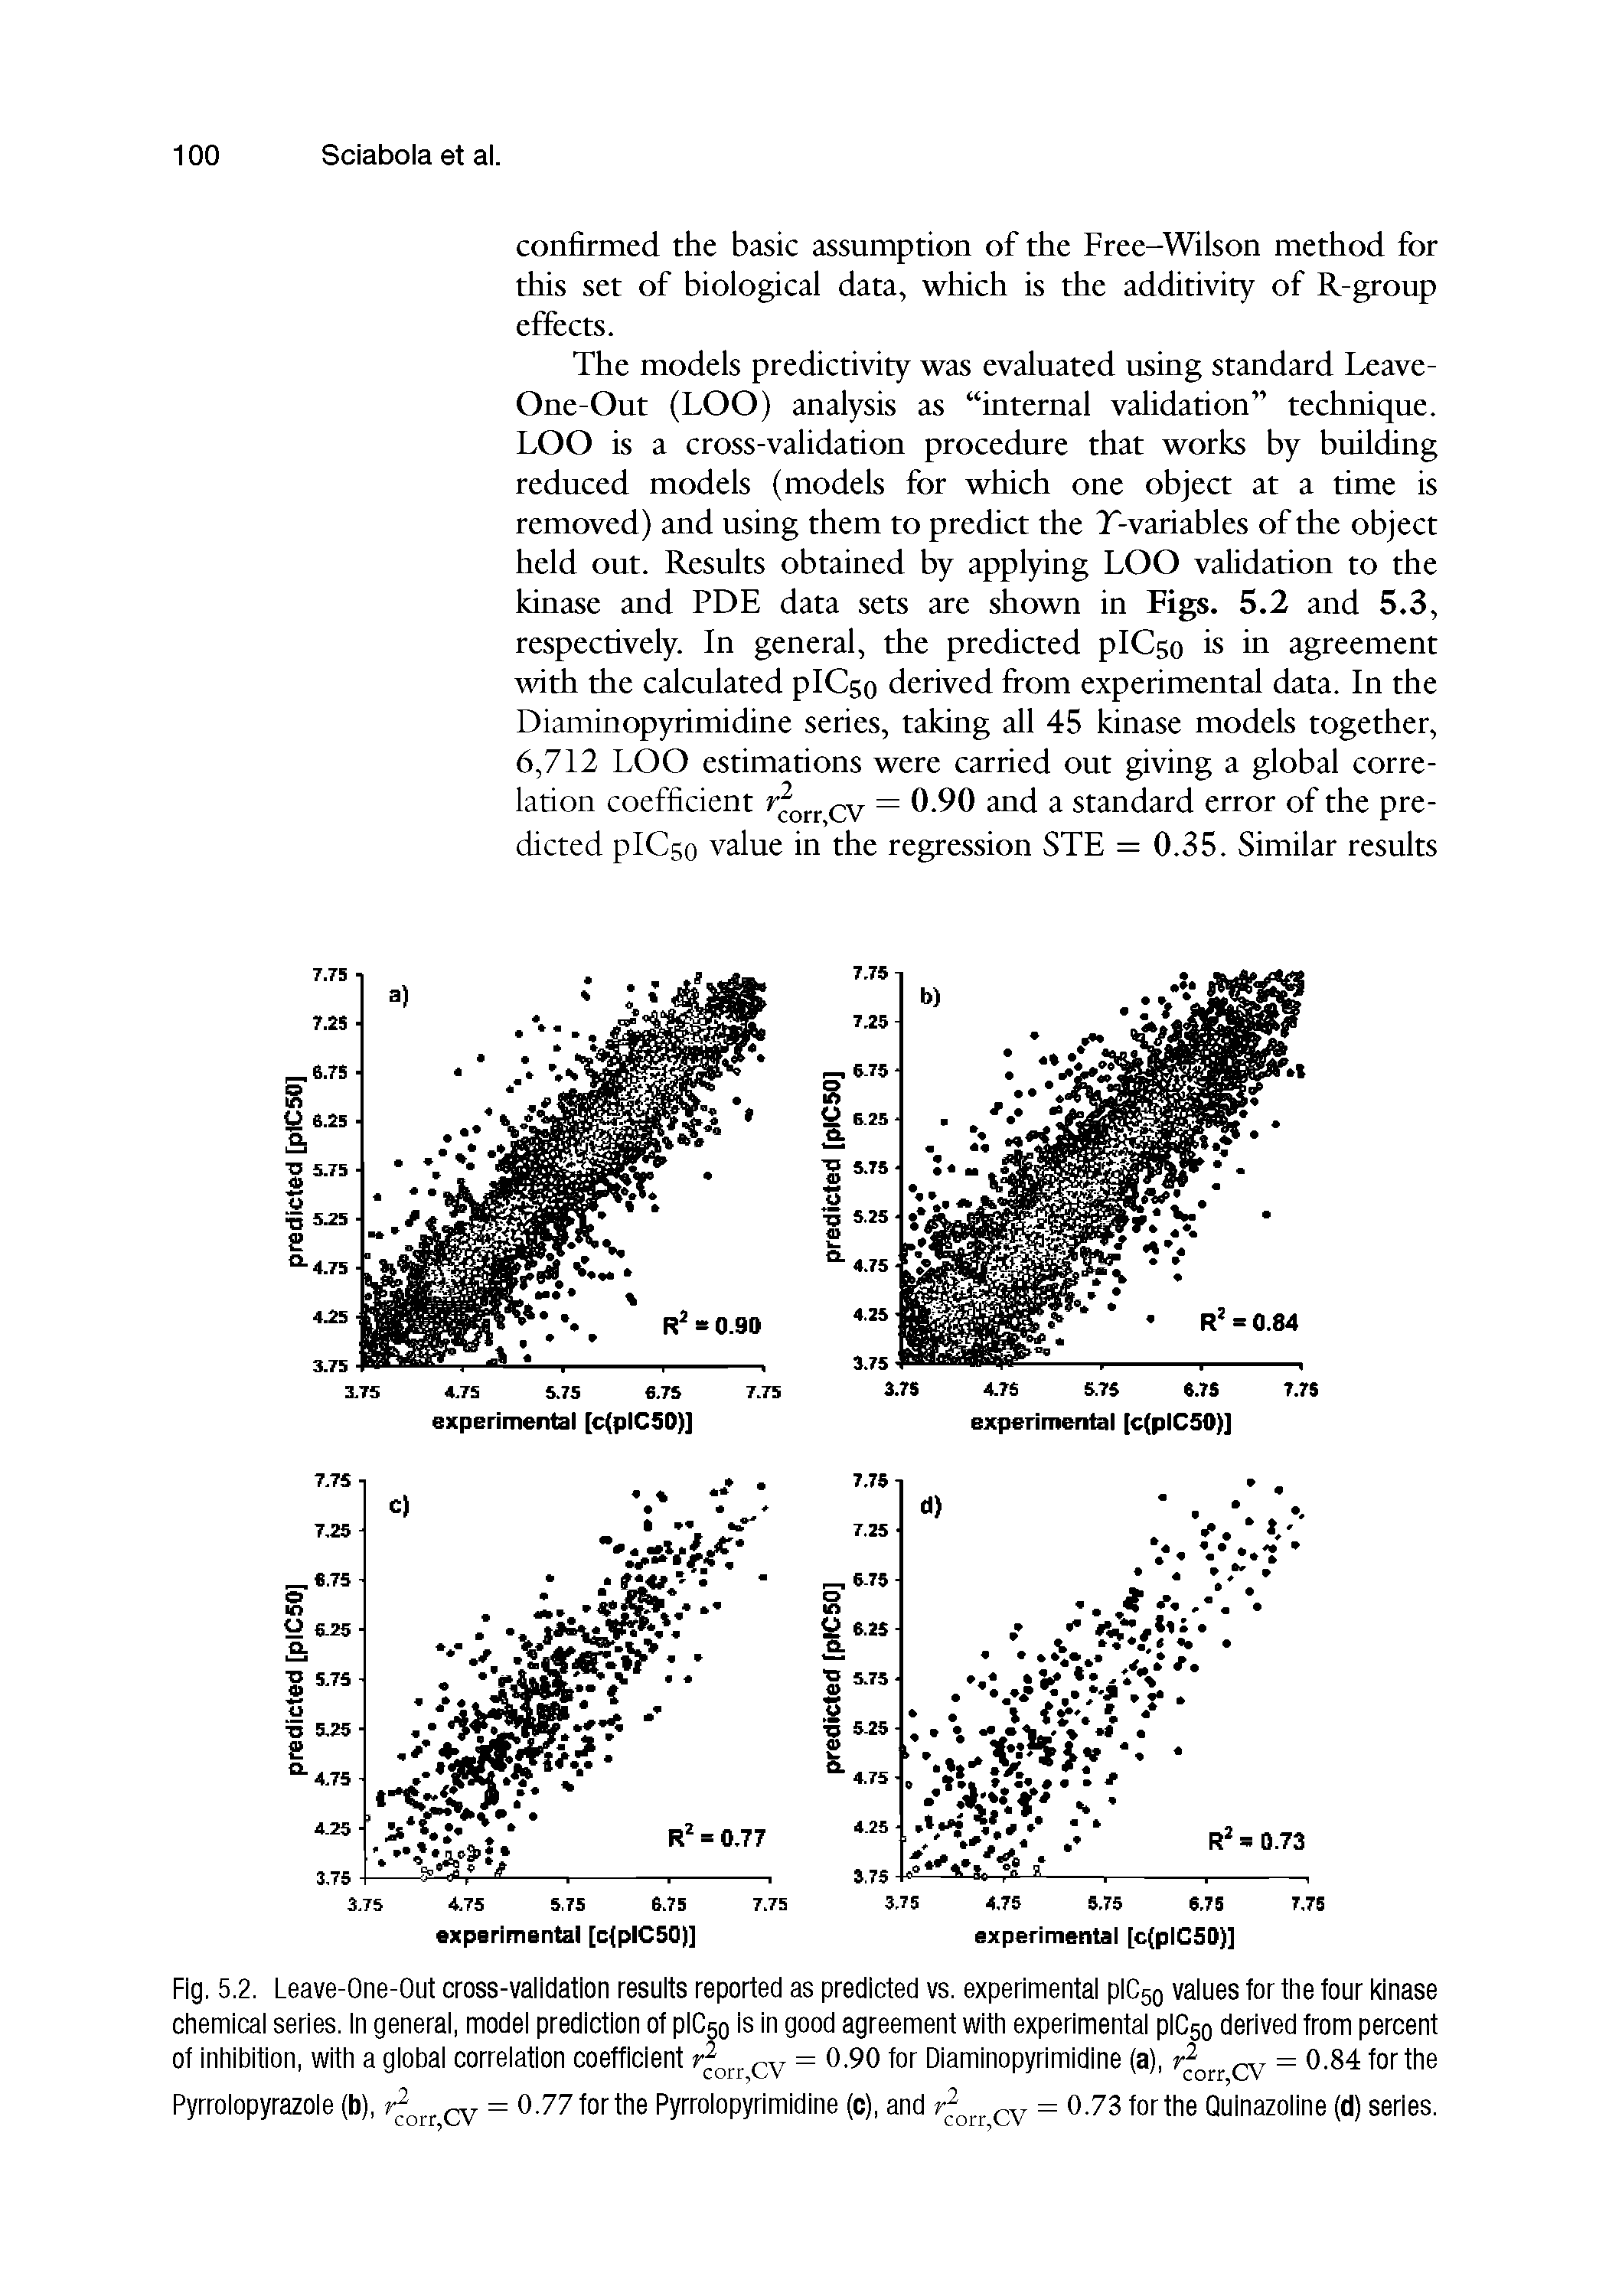 Fig. 5.2. Leave-One-Out cross-validation results reported as predicted vs. experimental plC50 values for the four kinase chemical series. In general, model prediction of pICsois in 9°°d agreement with experimental pICso derived from percent of inhibition, with a global correlation coefficient r orr cv = 0.90 for Diaminopyrimidine (a), = 0.84 for the...